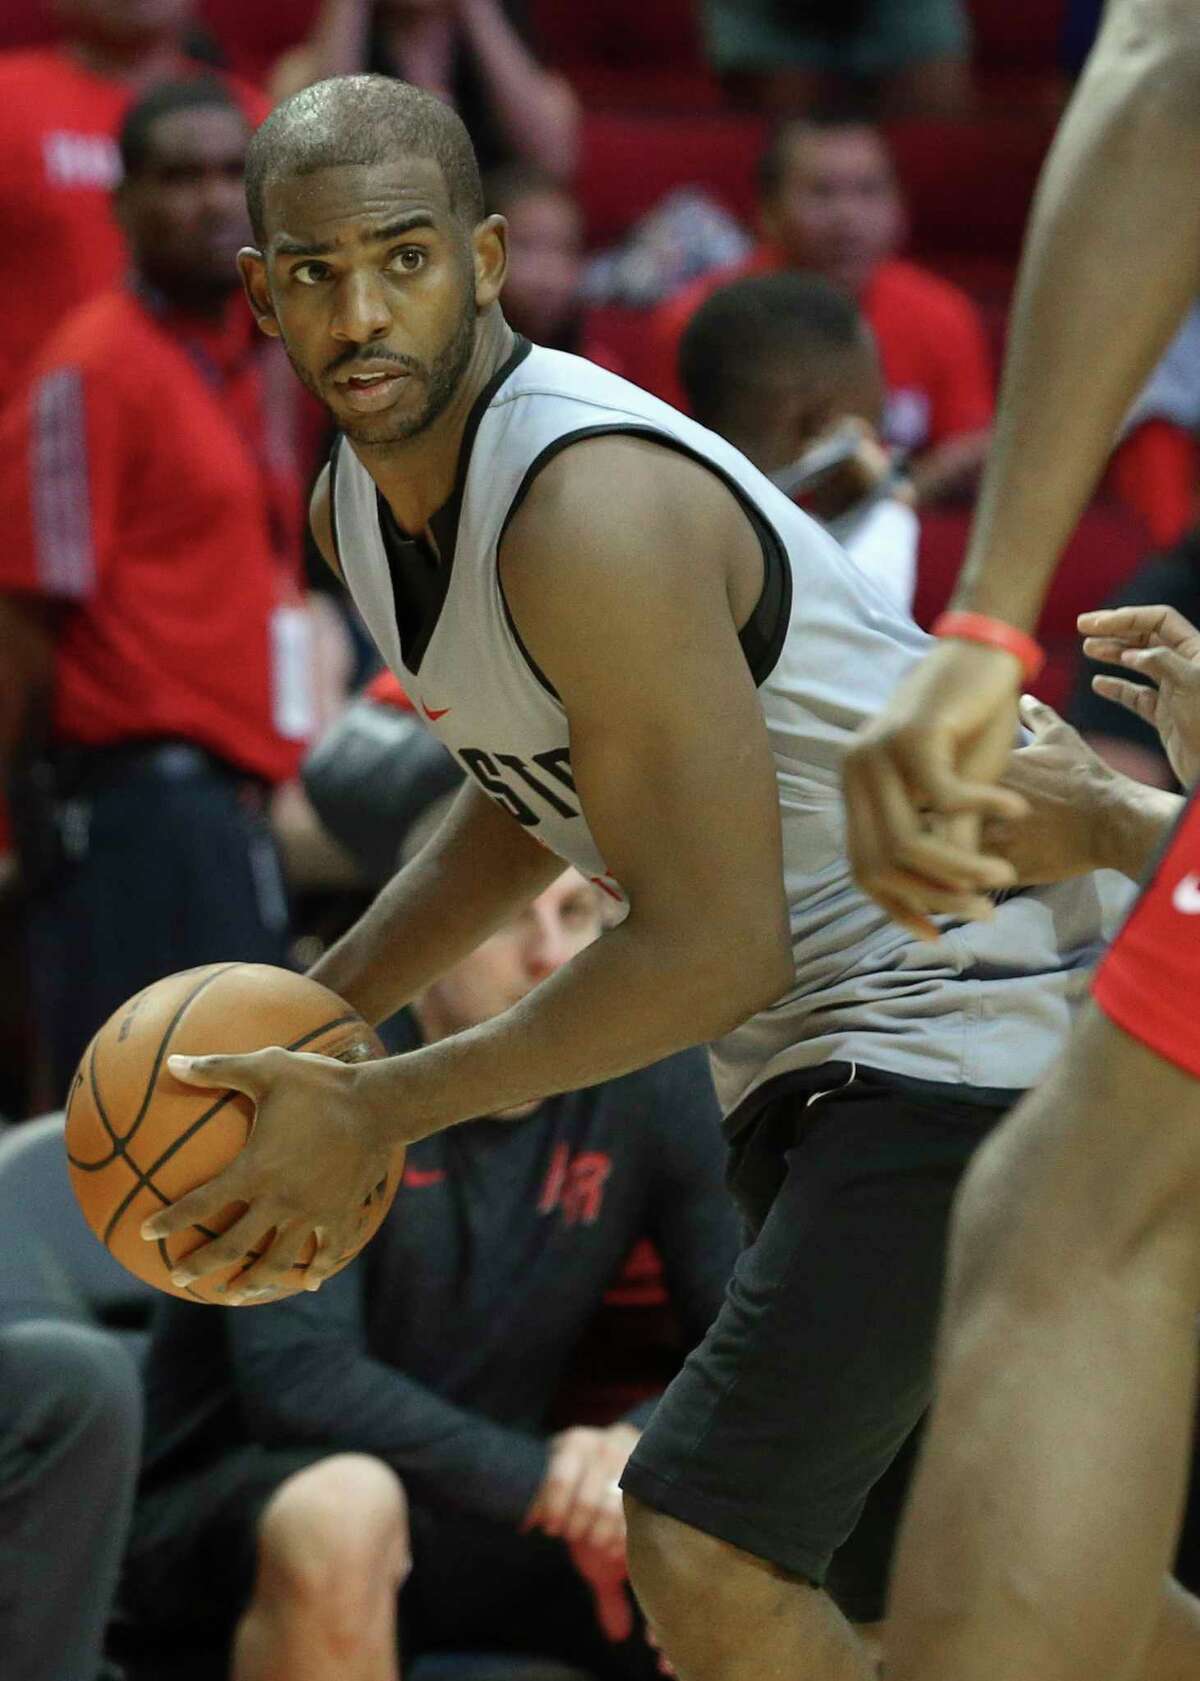 Chris Paul looks in sync with Warriors in early preseason win over